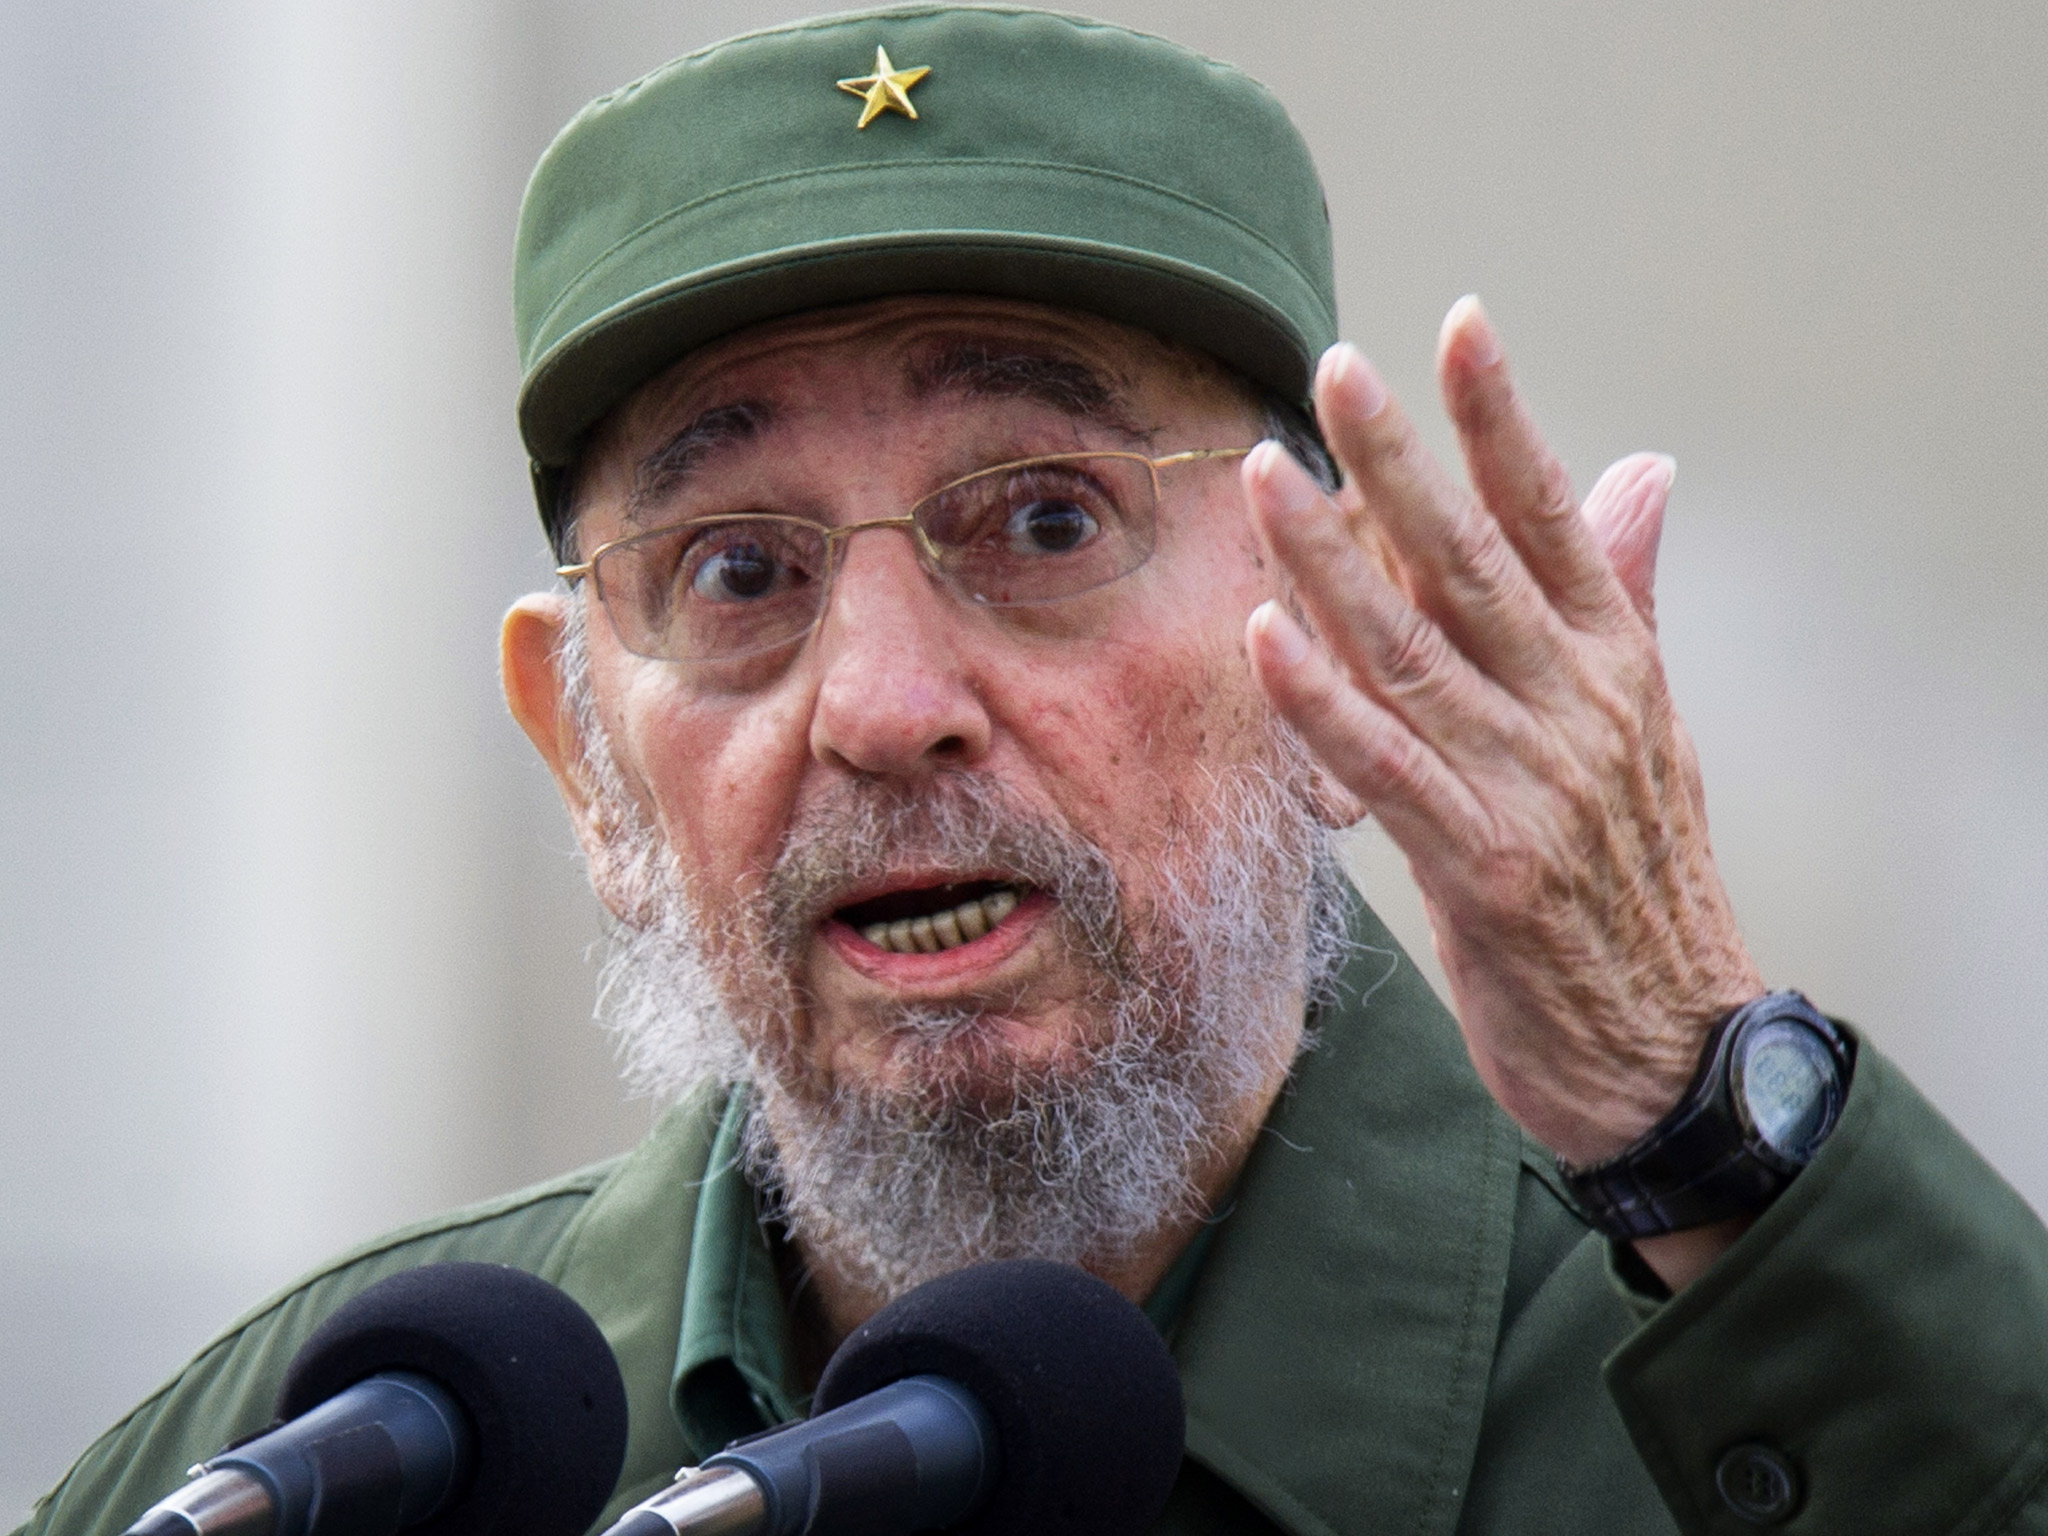 US-Cuba relations: Fidel Castro backs restoring diplomatic ties between the two nations – but still doesn't trust them - Americas - World - The Independent